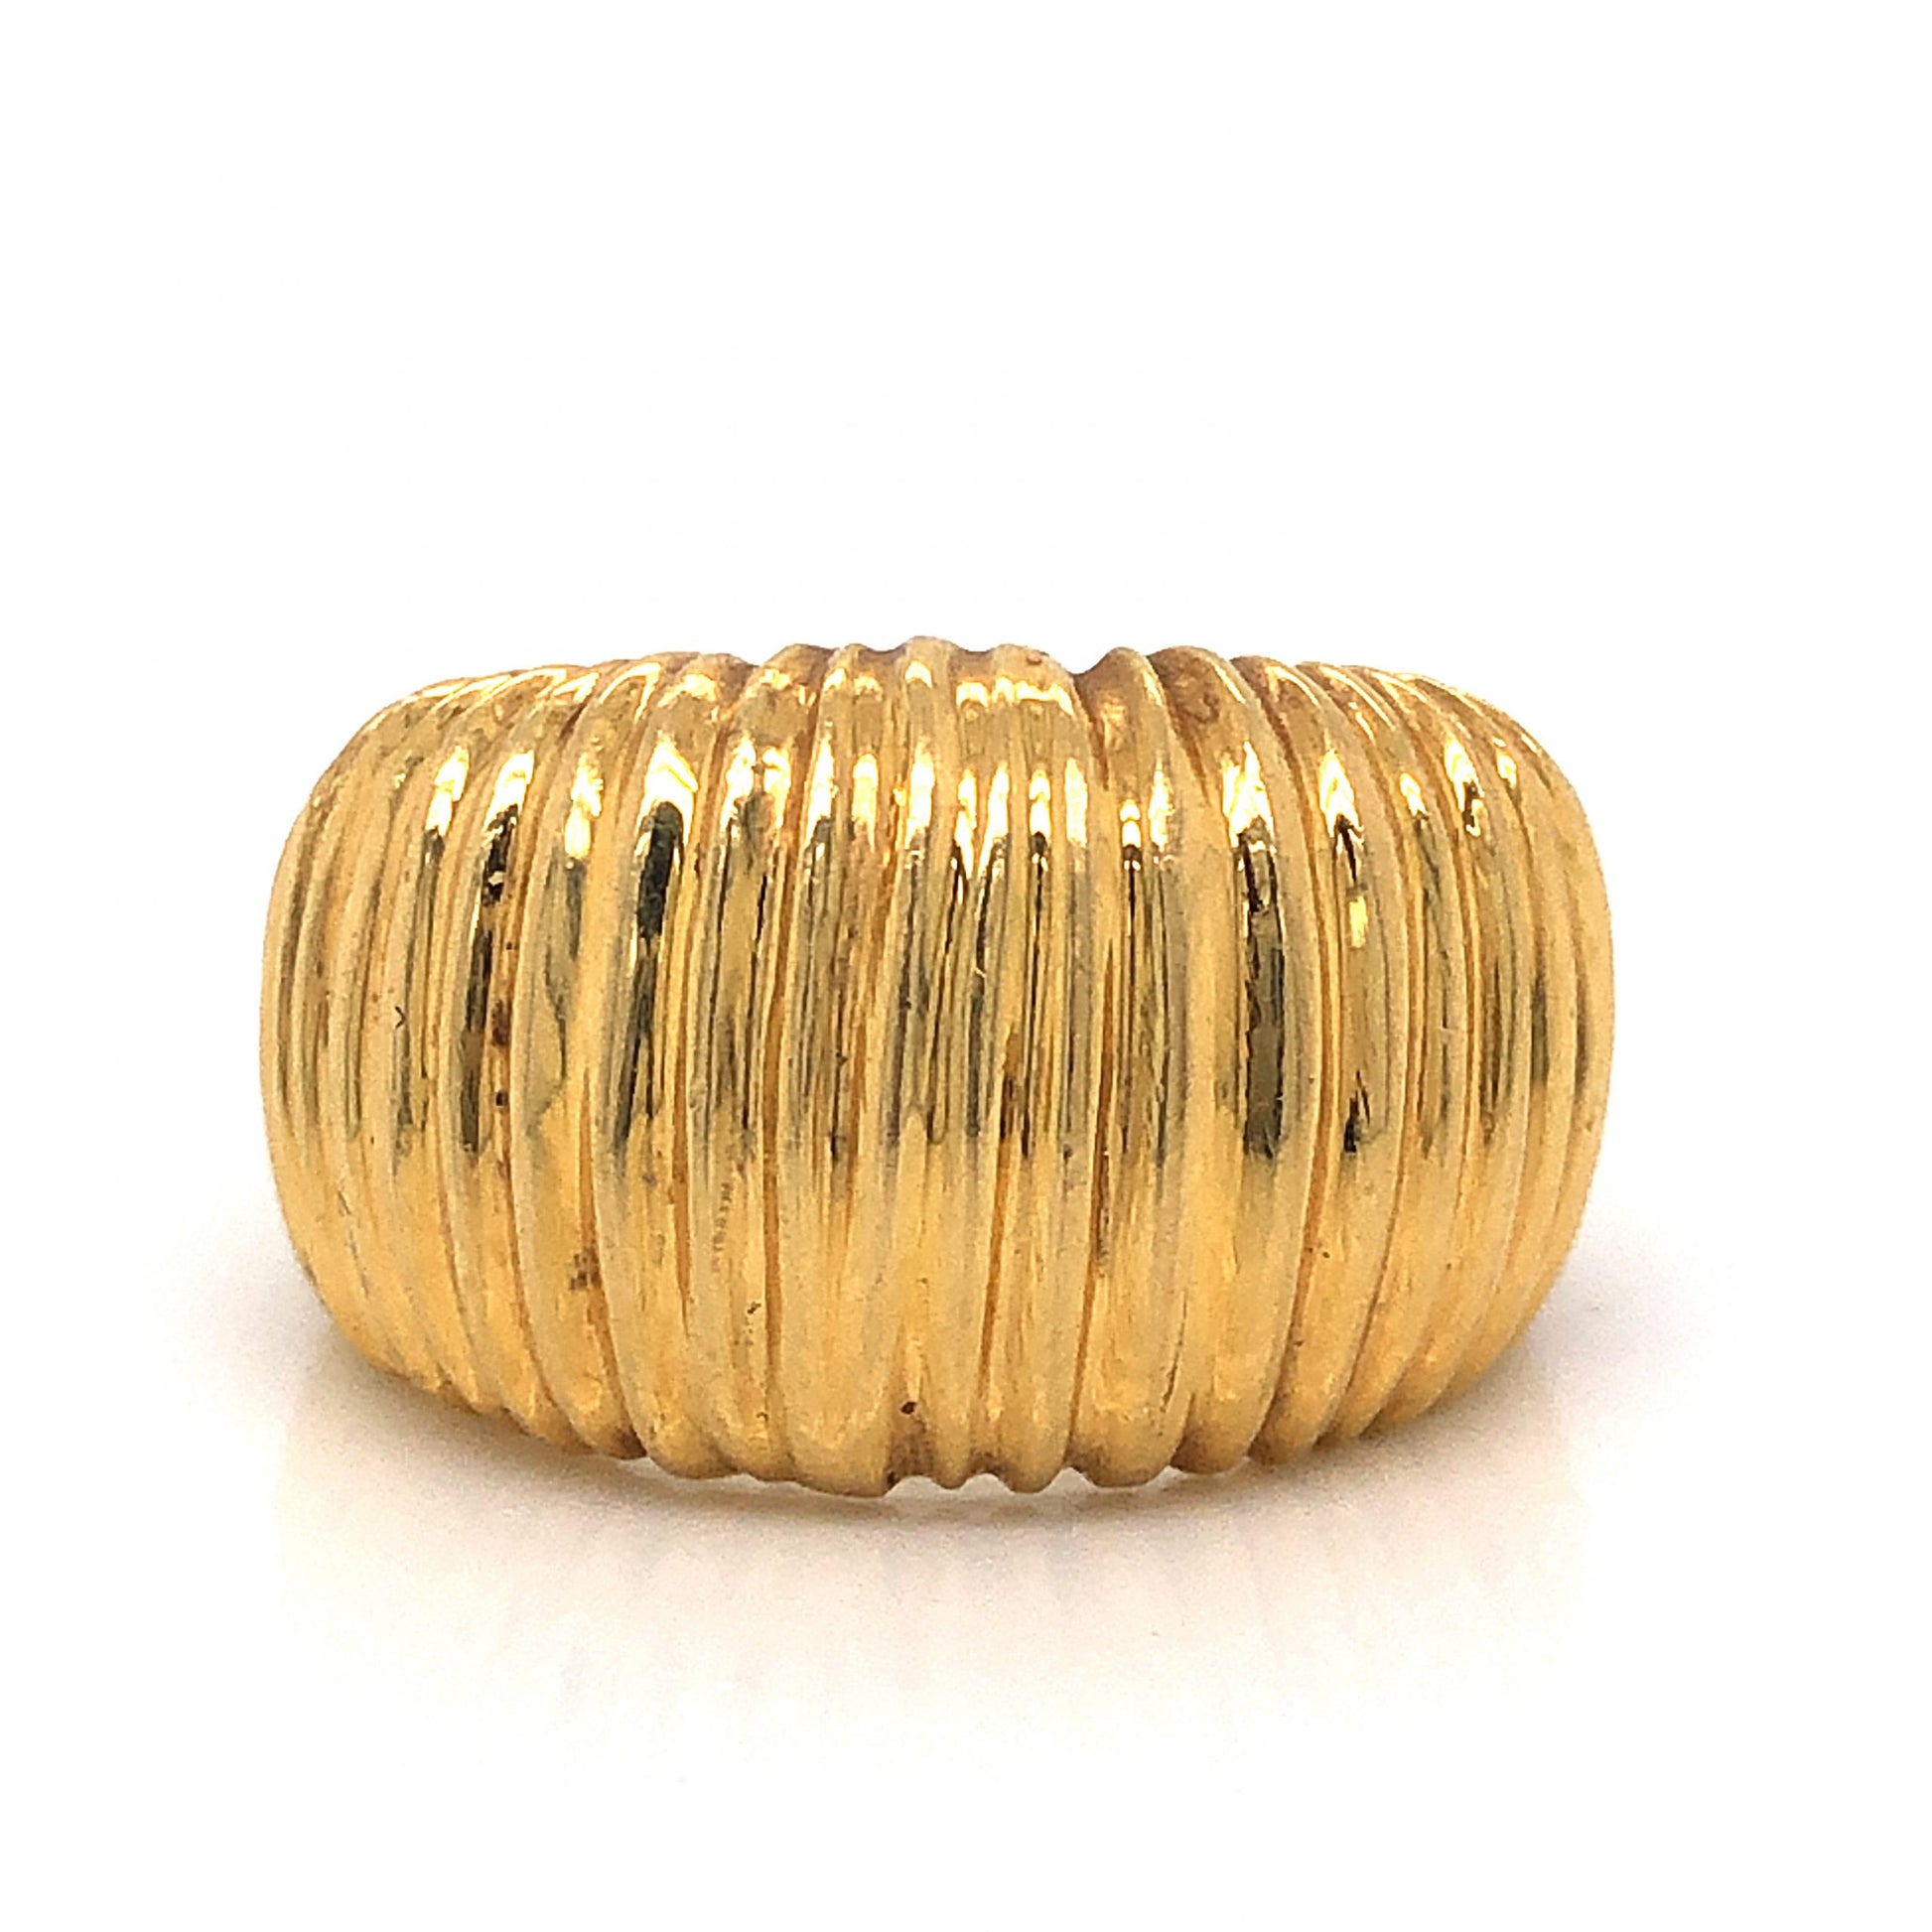 Textured Statement Ring in 18k Yellow GoldComposition: 18 Karat Yellow Gold Ring Size: 7 Total Gram Weight: 8.0 g Inscription: 750 1183
      